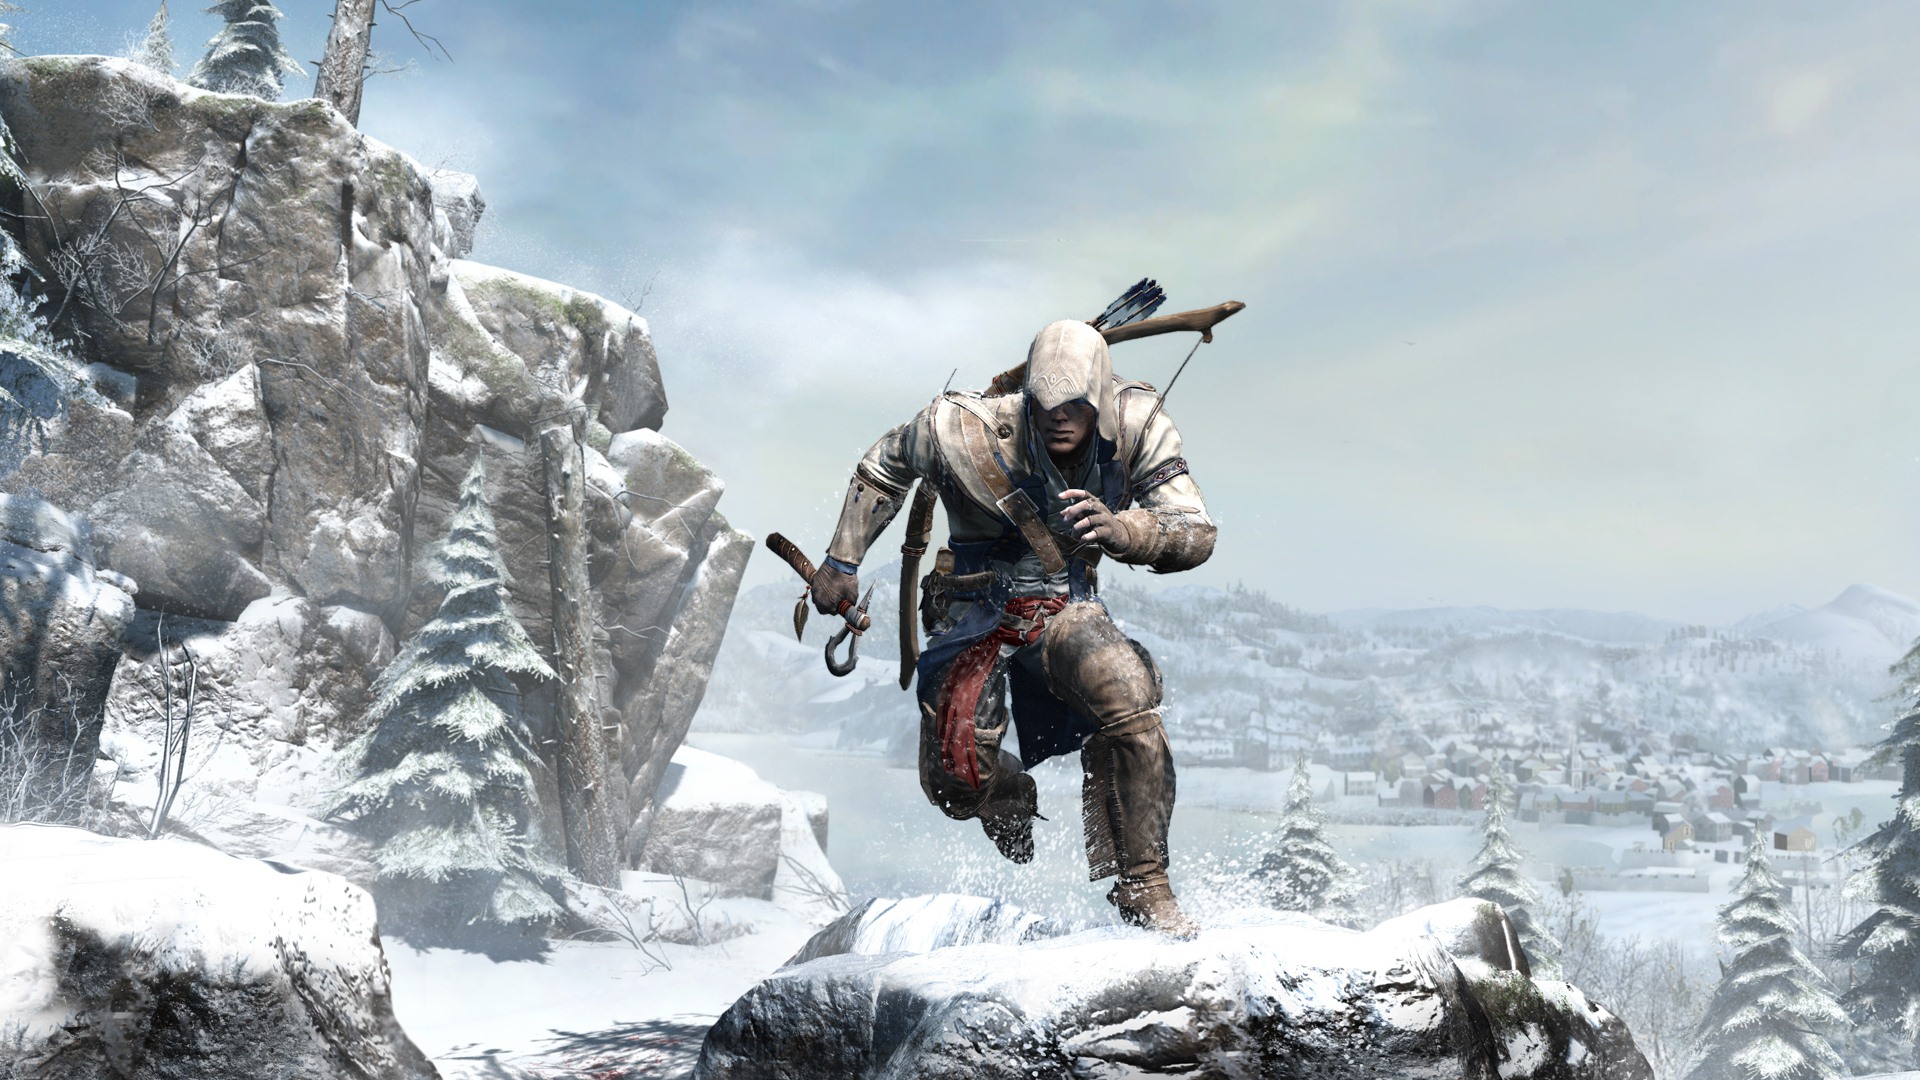 Assassin's Creed 3 HD wallpapers #9 - 1920x1080